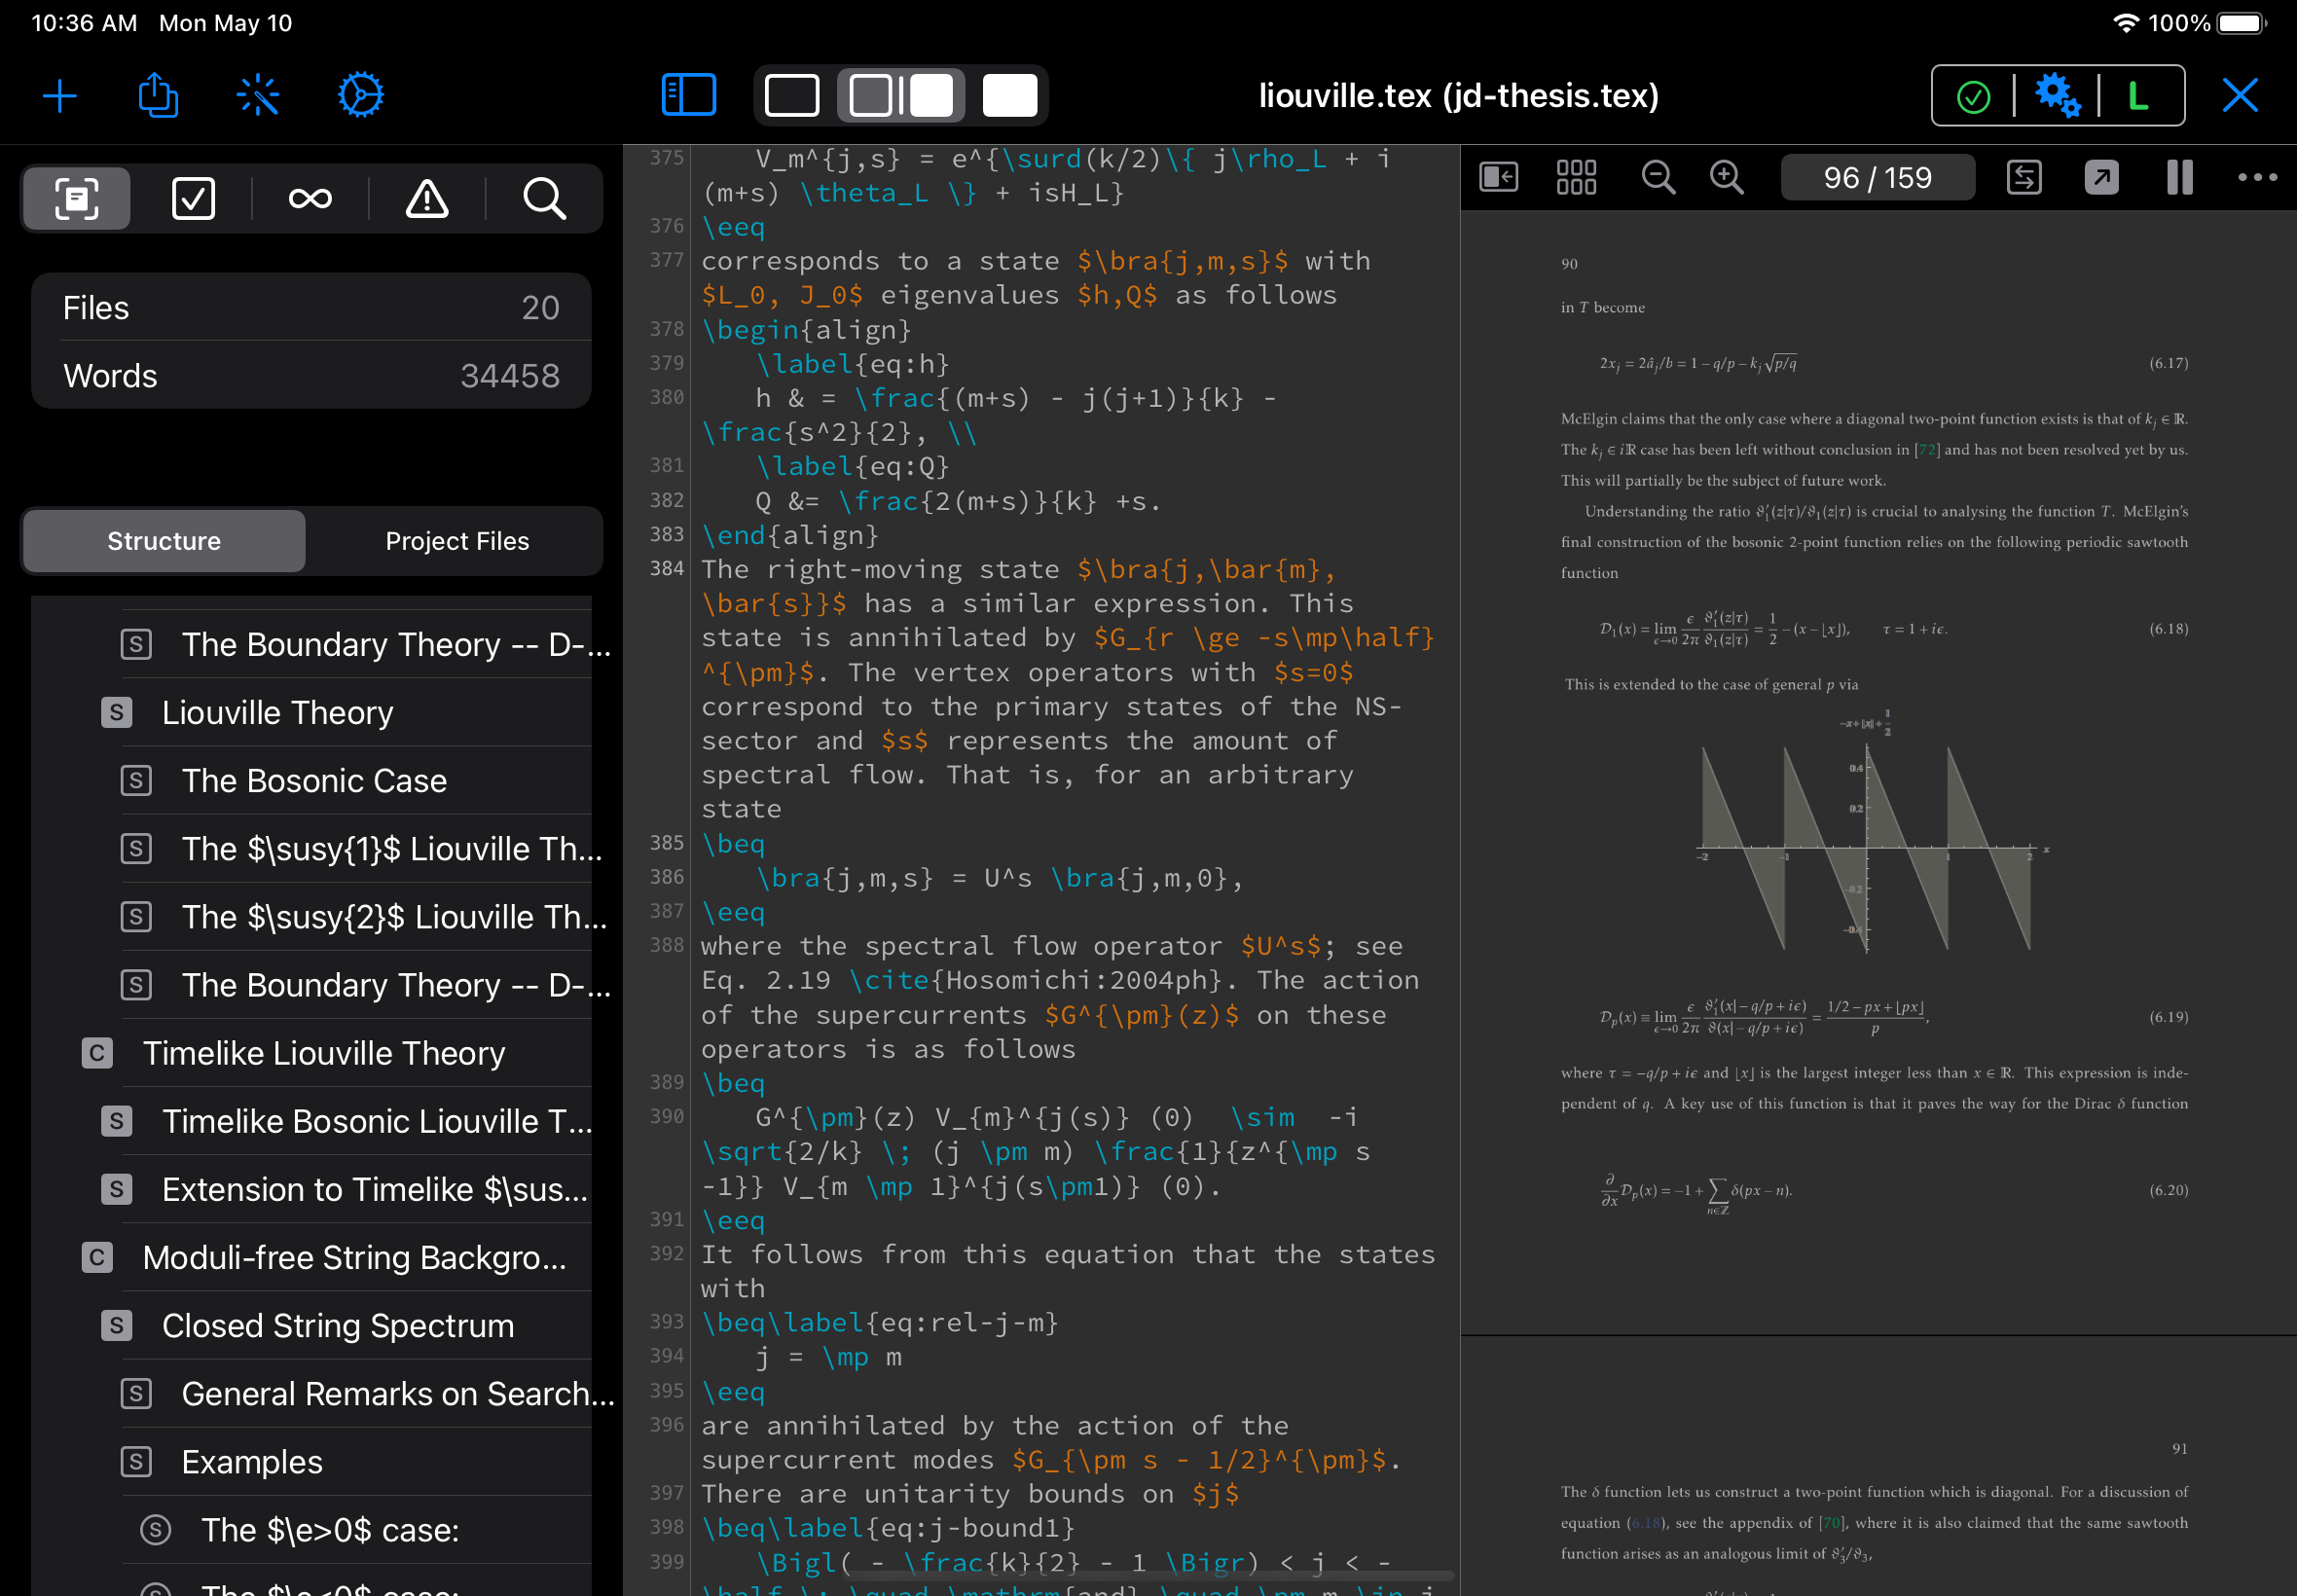 docs/apps/workspace/jd-thesis-sawtooth-dark-mode_ios.png